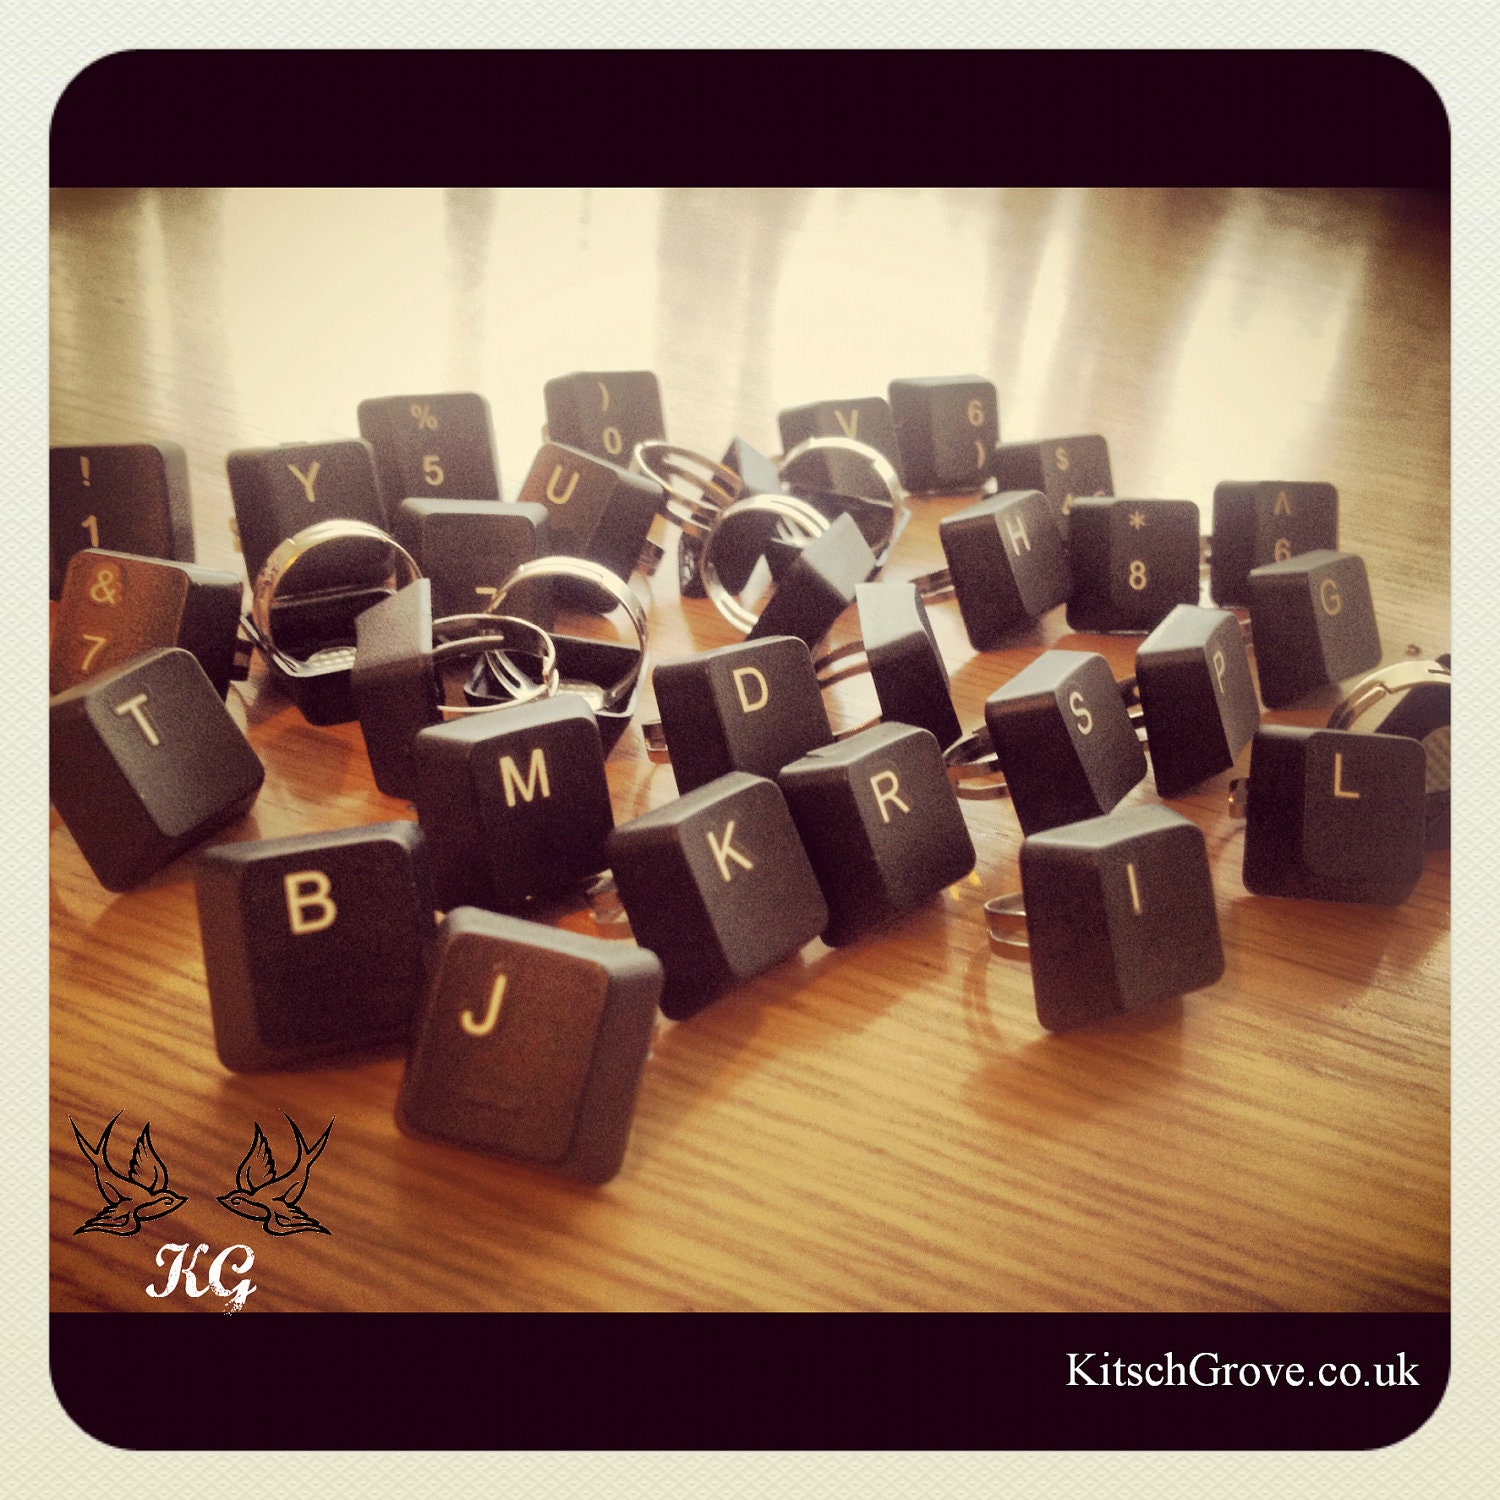 Retro/ Recycled Keyboard Ring - Kitsch - Geek - Gift/ Present. Personalised Initial